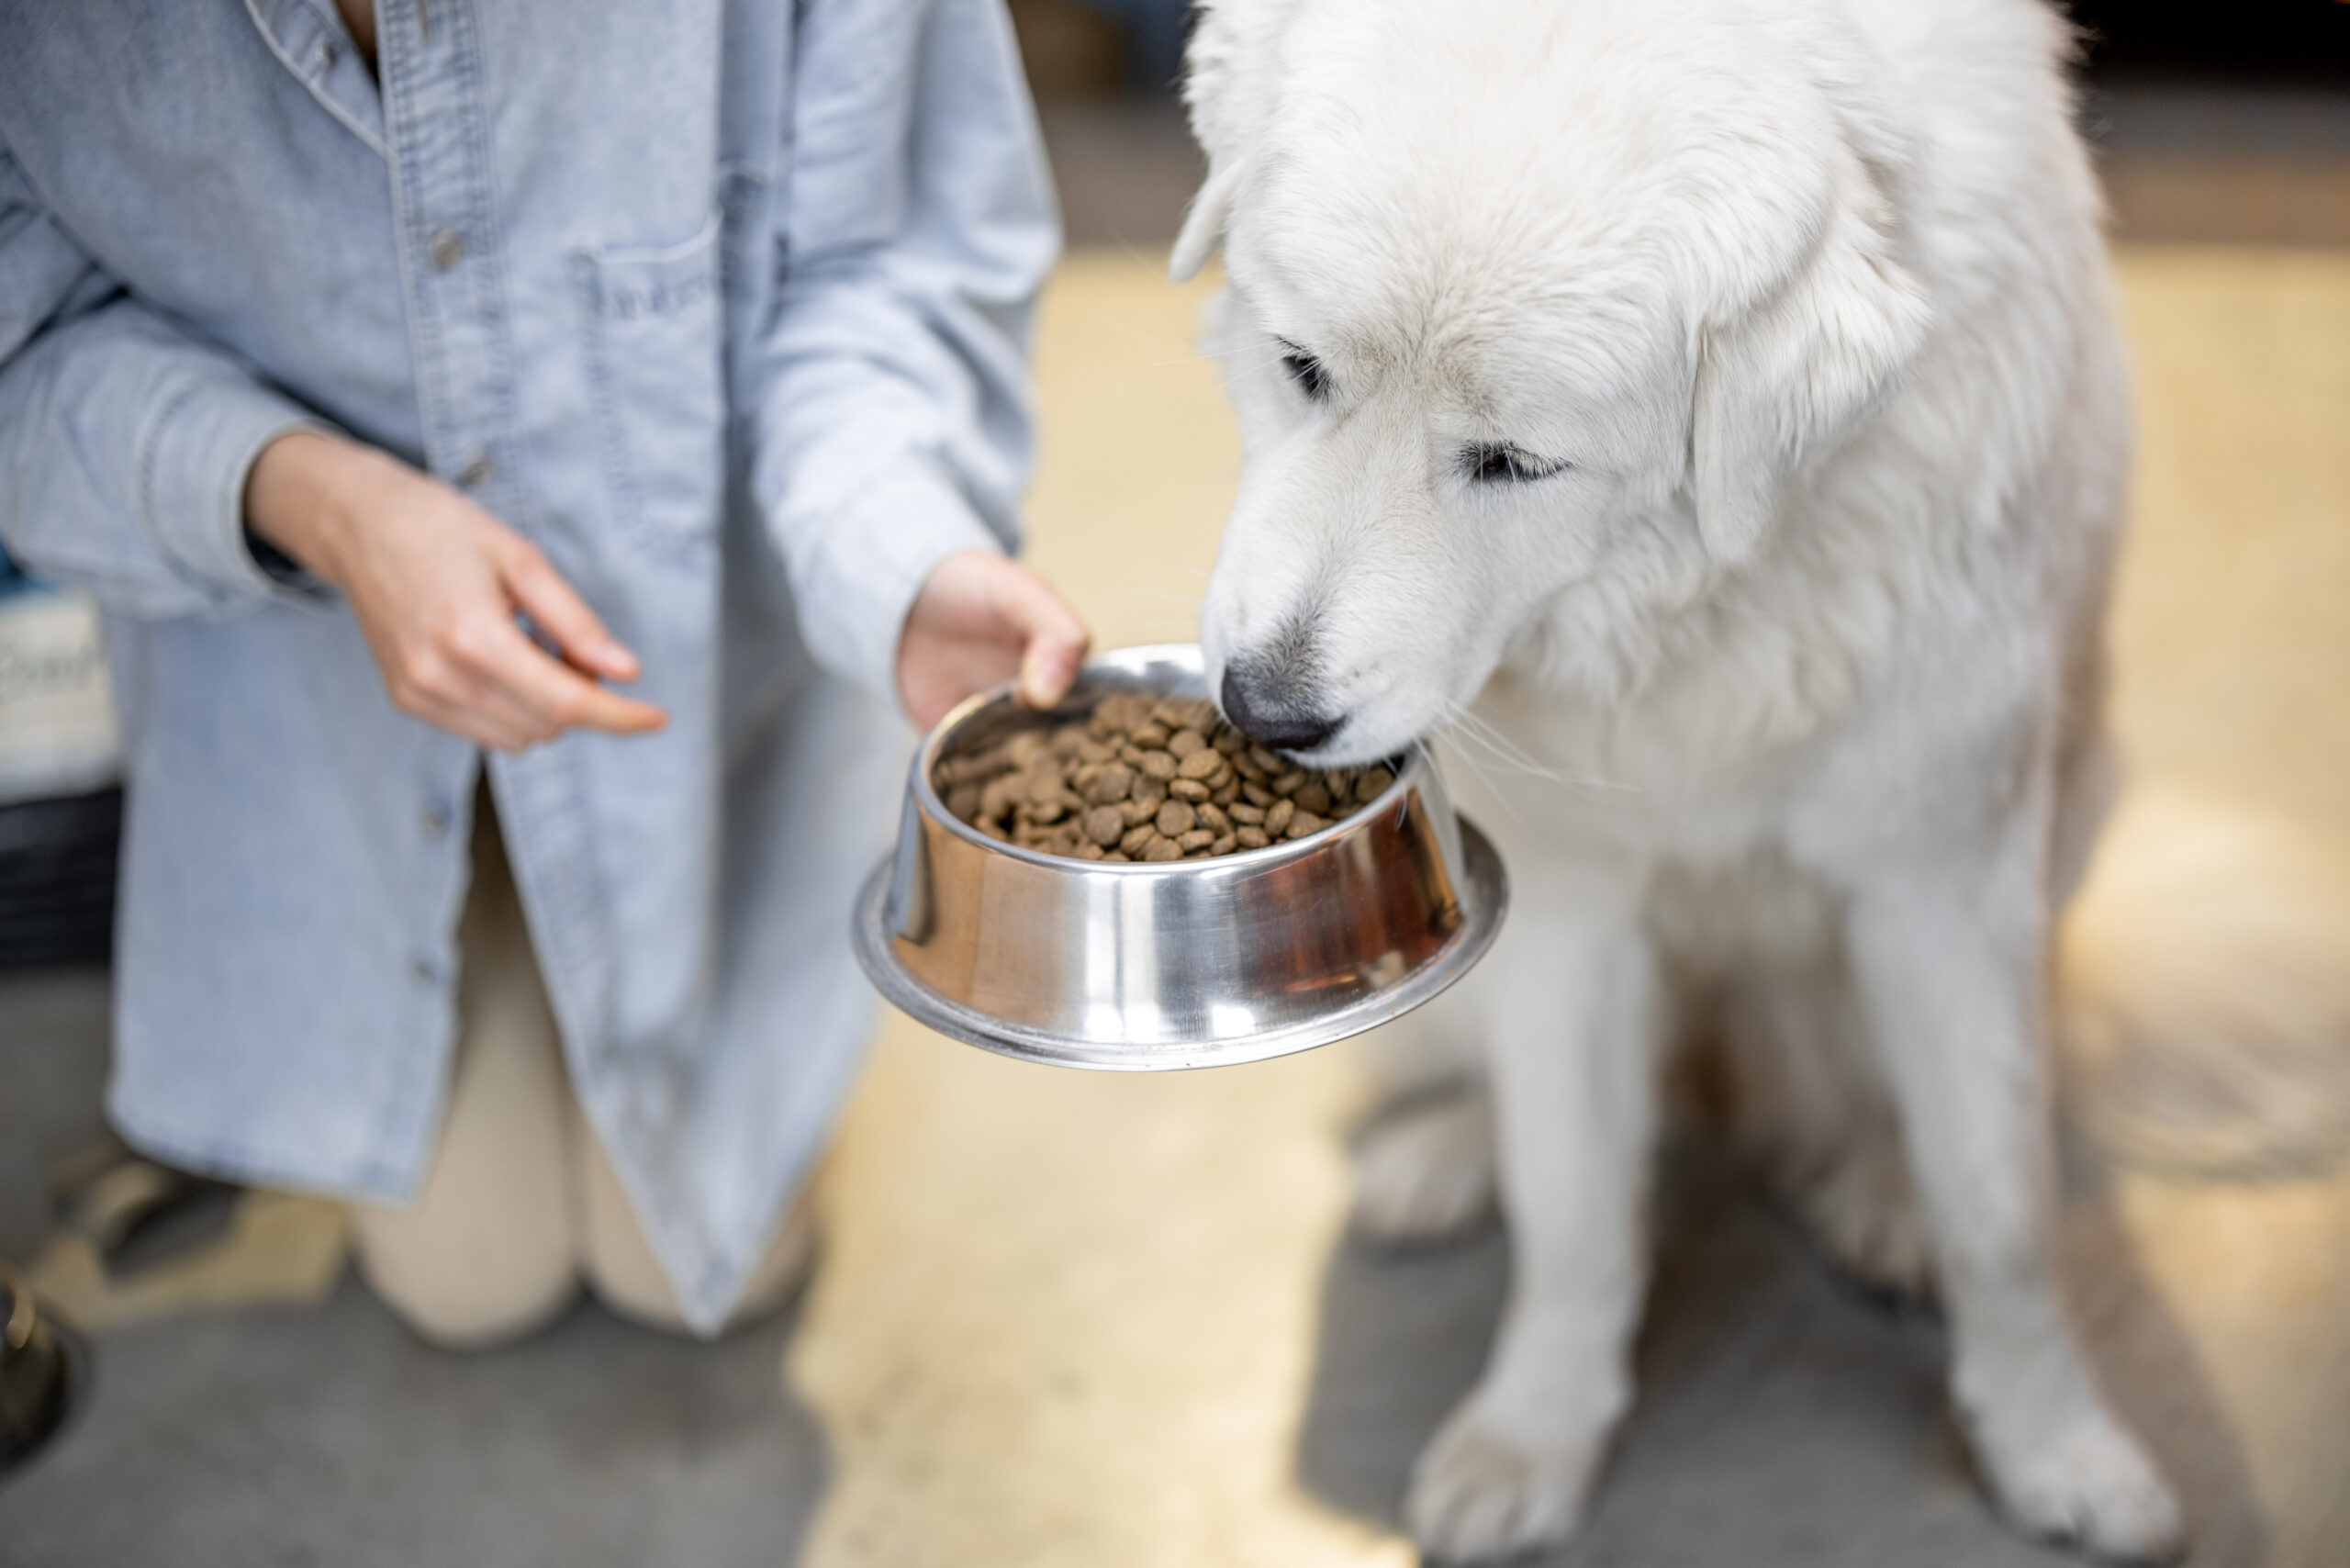 Young woman gives a bowl with dry food for her white dog at home. Concept of healthy and balanced nutrition for pets